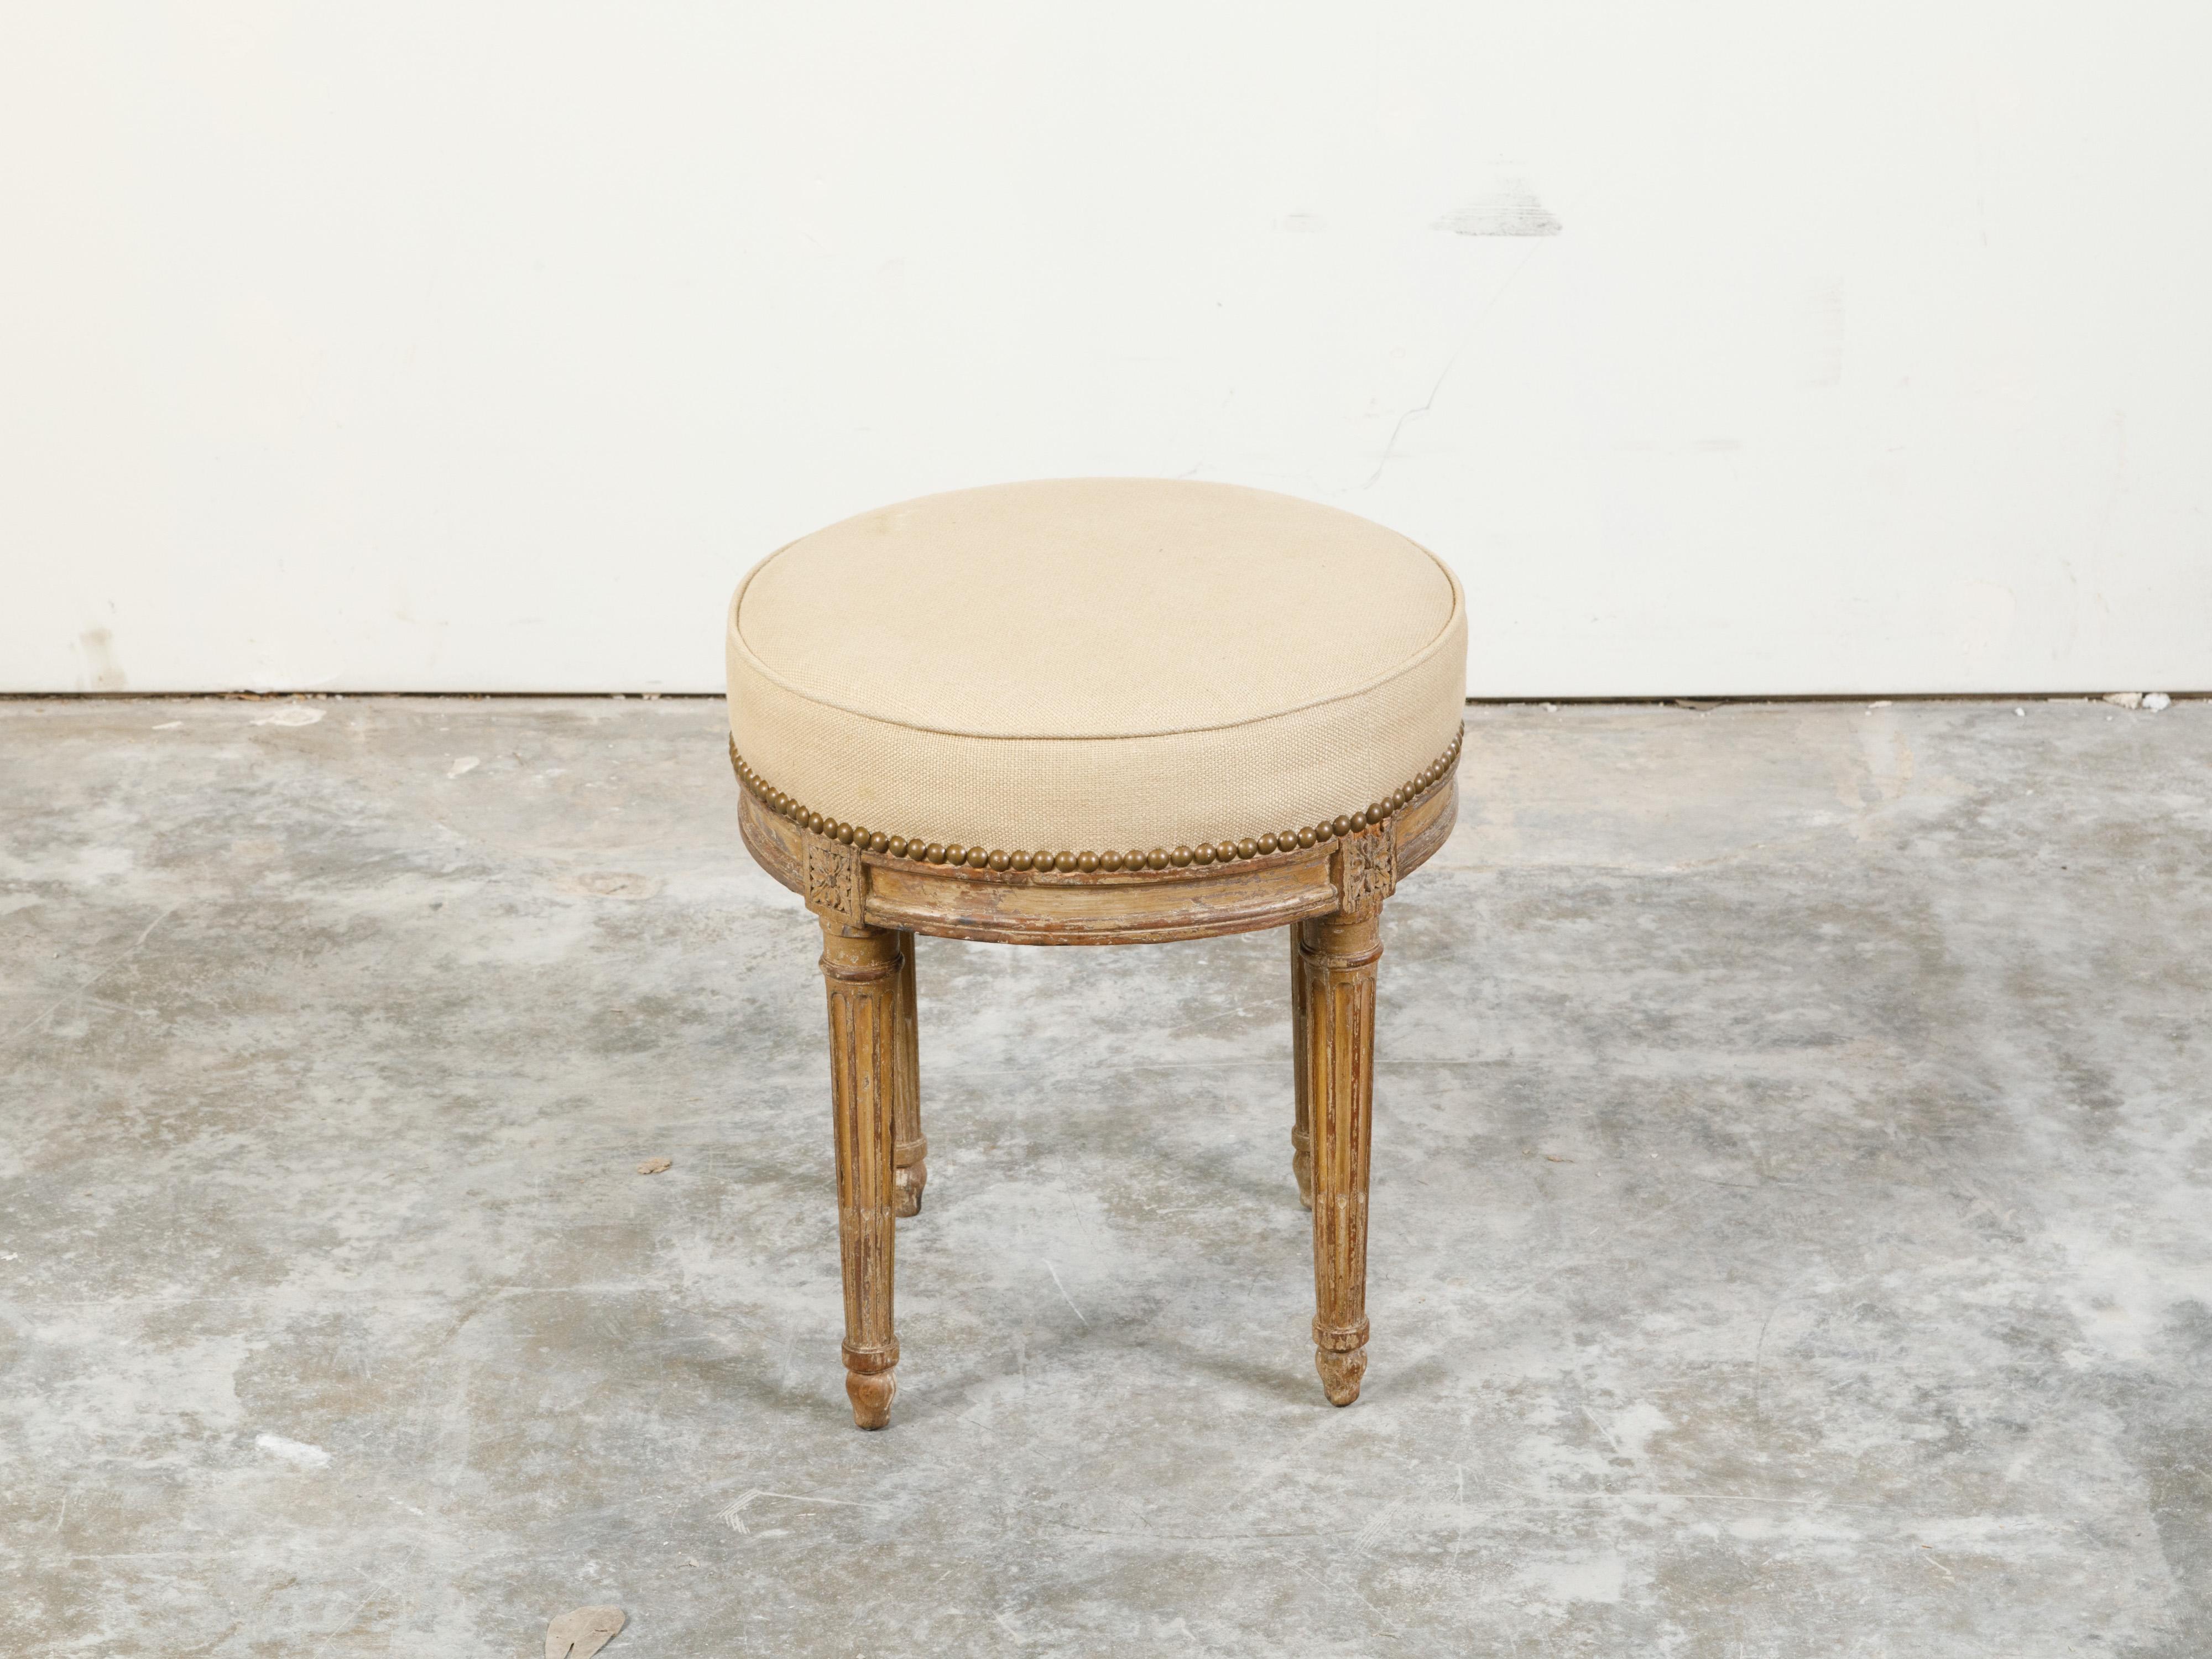 Turned French Neoclassical Style 19th Century Stool with Fluted Legs and New Upholstery For Sale